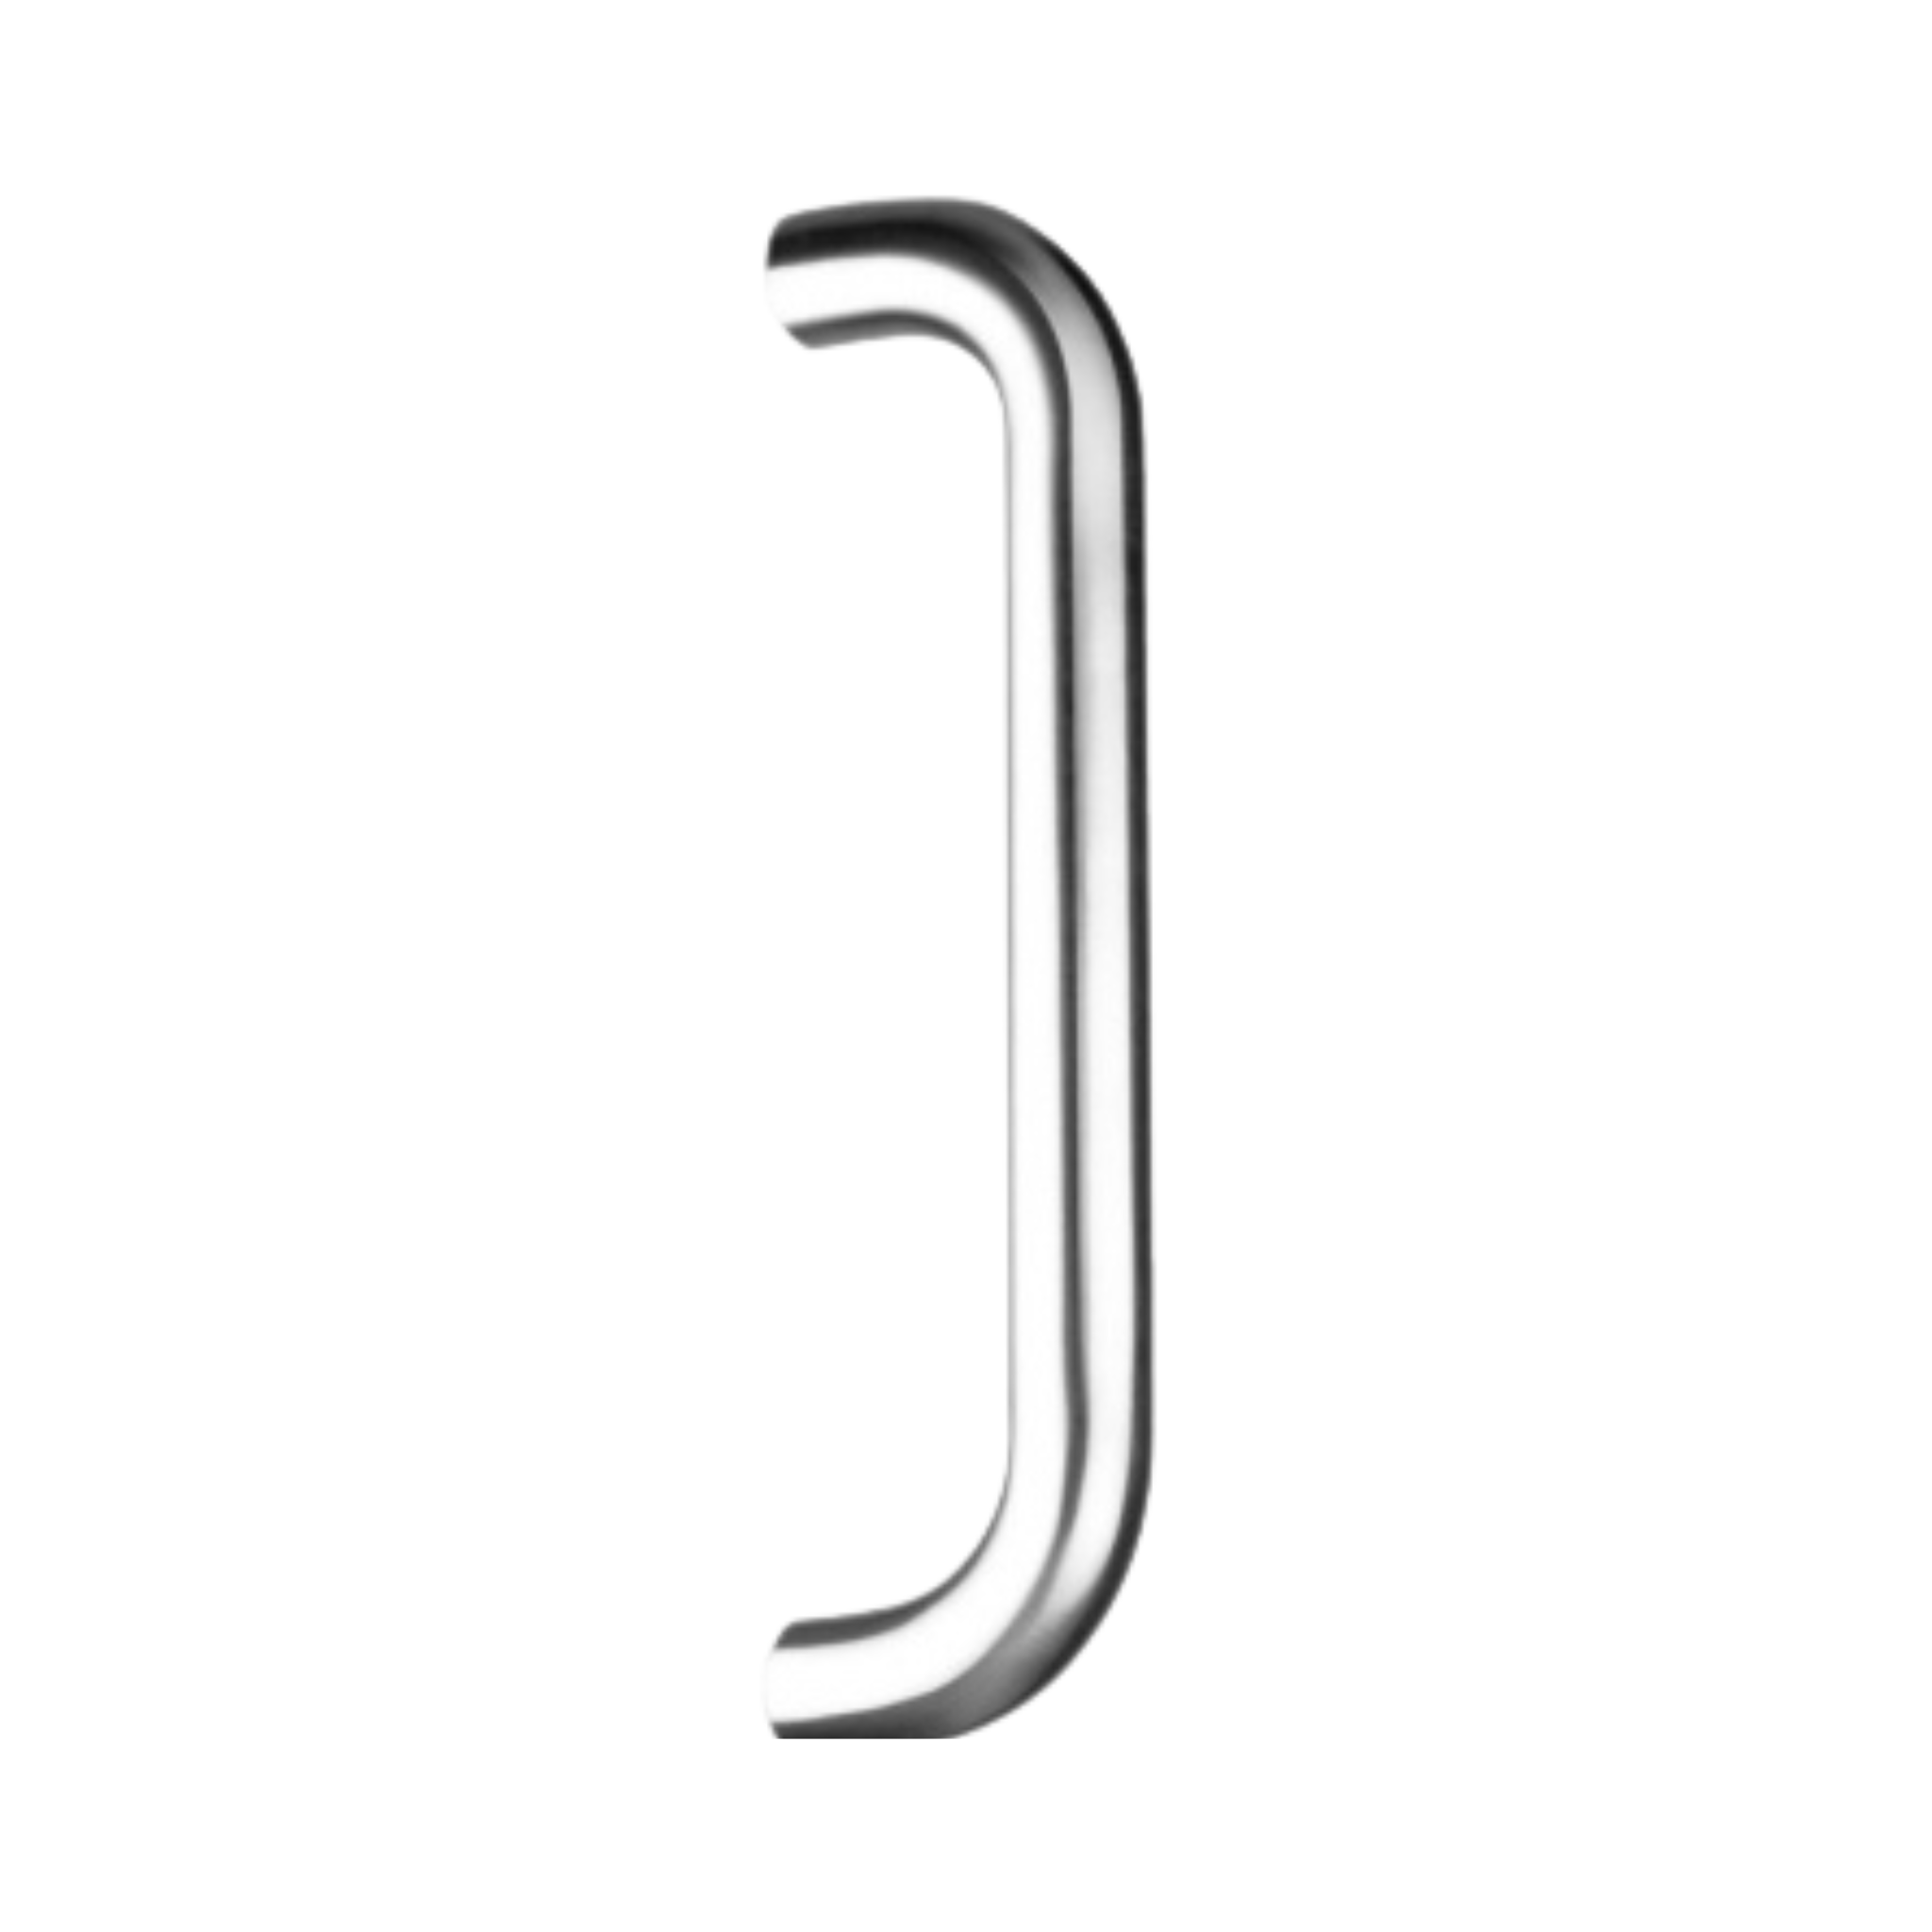 QS2203/1 D Handle, Pull Handle, Round, D Handle, BoltThru, 19mm (Ø) x 130mm (ctc), Stainless Steel, QS